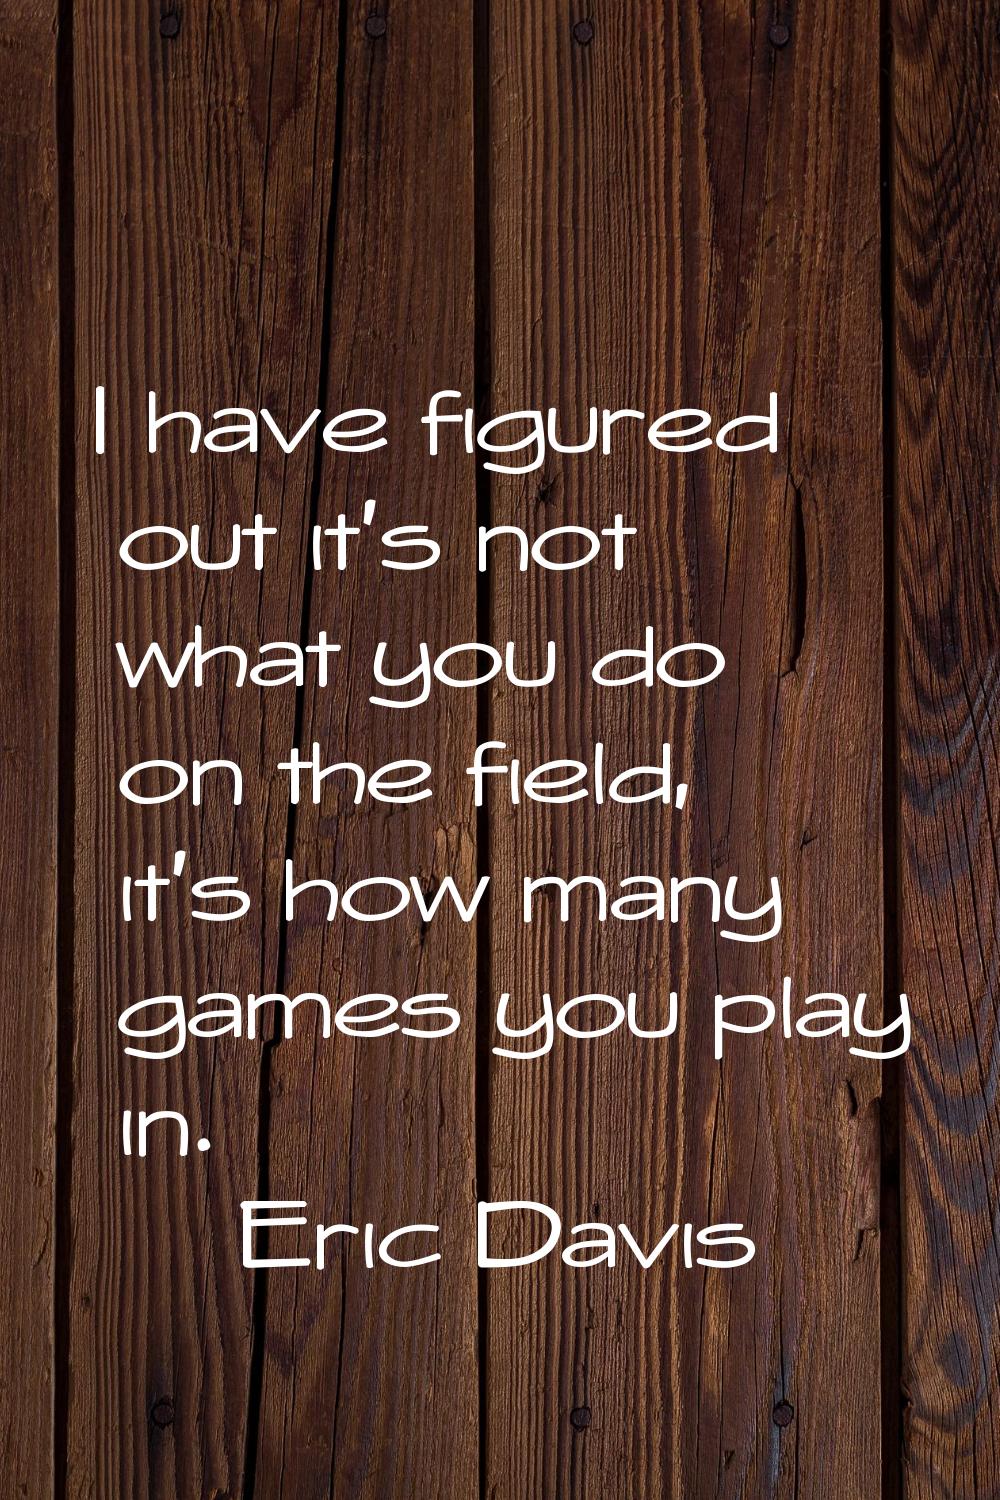 I have figured out it's not what you do on the field, it's how many games you play in.